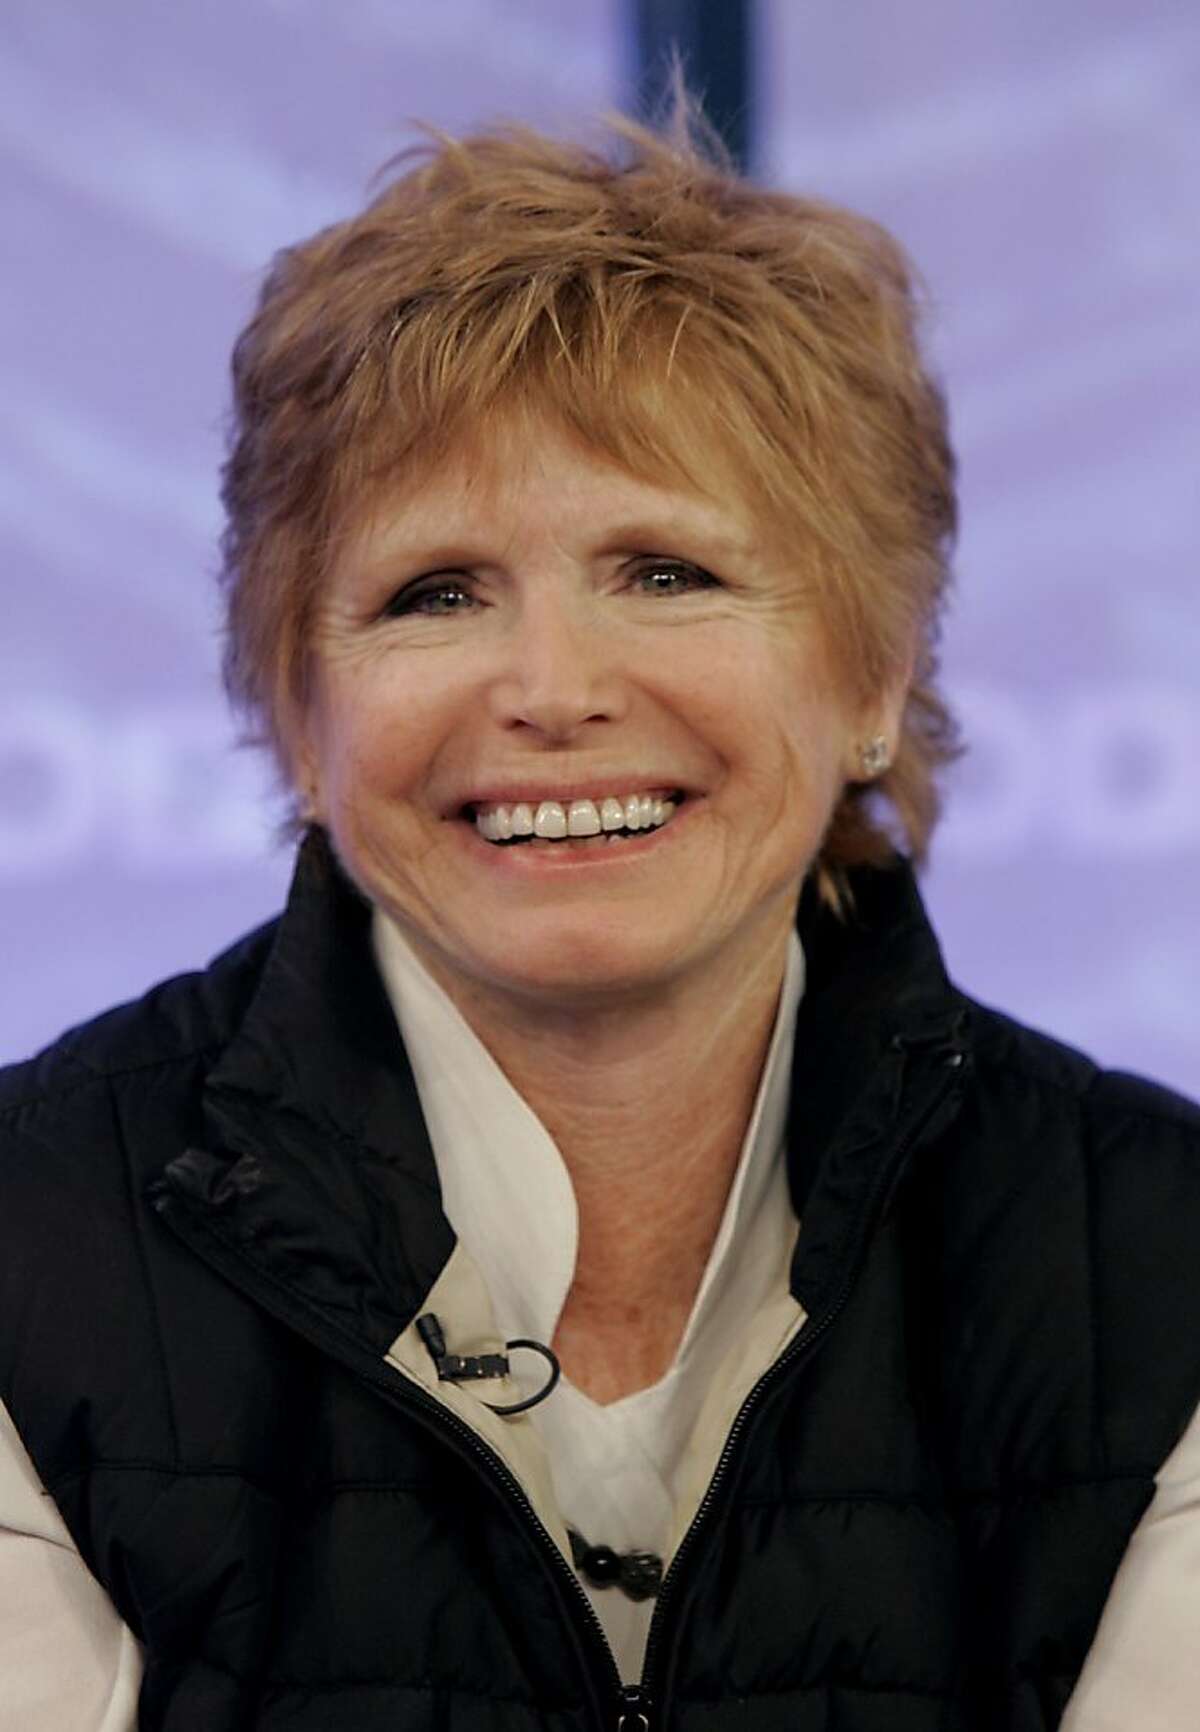 FILE - In this Feb. 26, 2008 file photo, Bonnie Franklin, of the 1970's sitcom "One Day at a Time, " appears with the reunited cast on the the NBC "Today" television program in New York. Franklin has been diagnosed with pancreatic cancer, her family said in a statement released by CBS on Monday, Sept. 24, 2012. (AP Photo/Richard Drew, File)